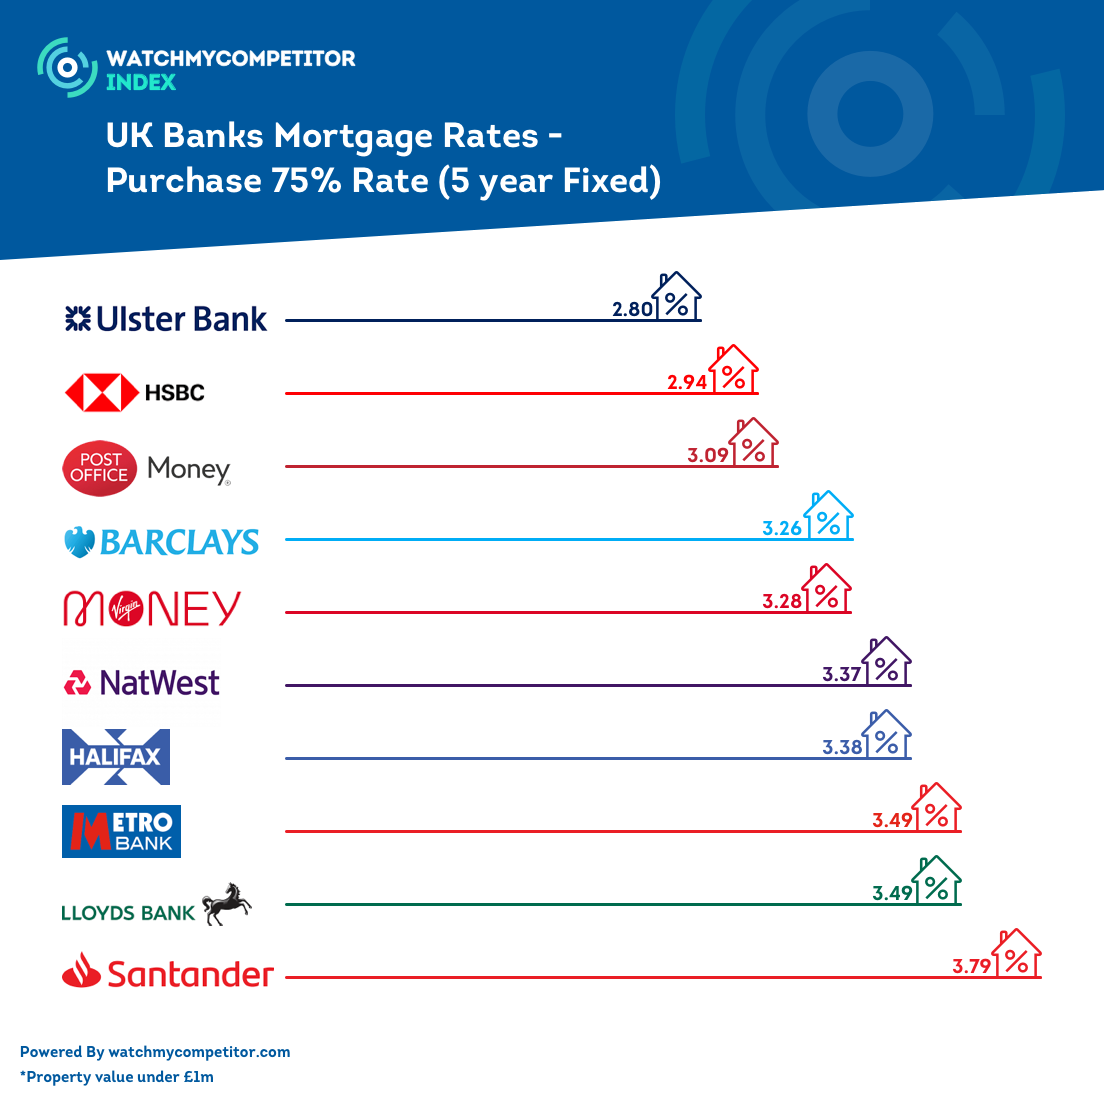 UK Mortgage Rates – Purchase 75% Rate (5 Year Fixed)